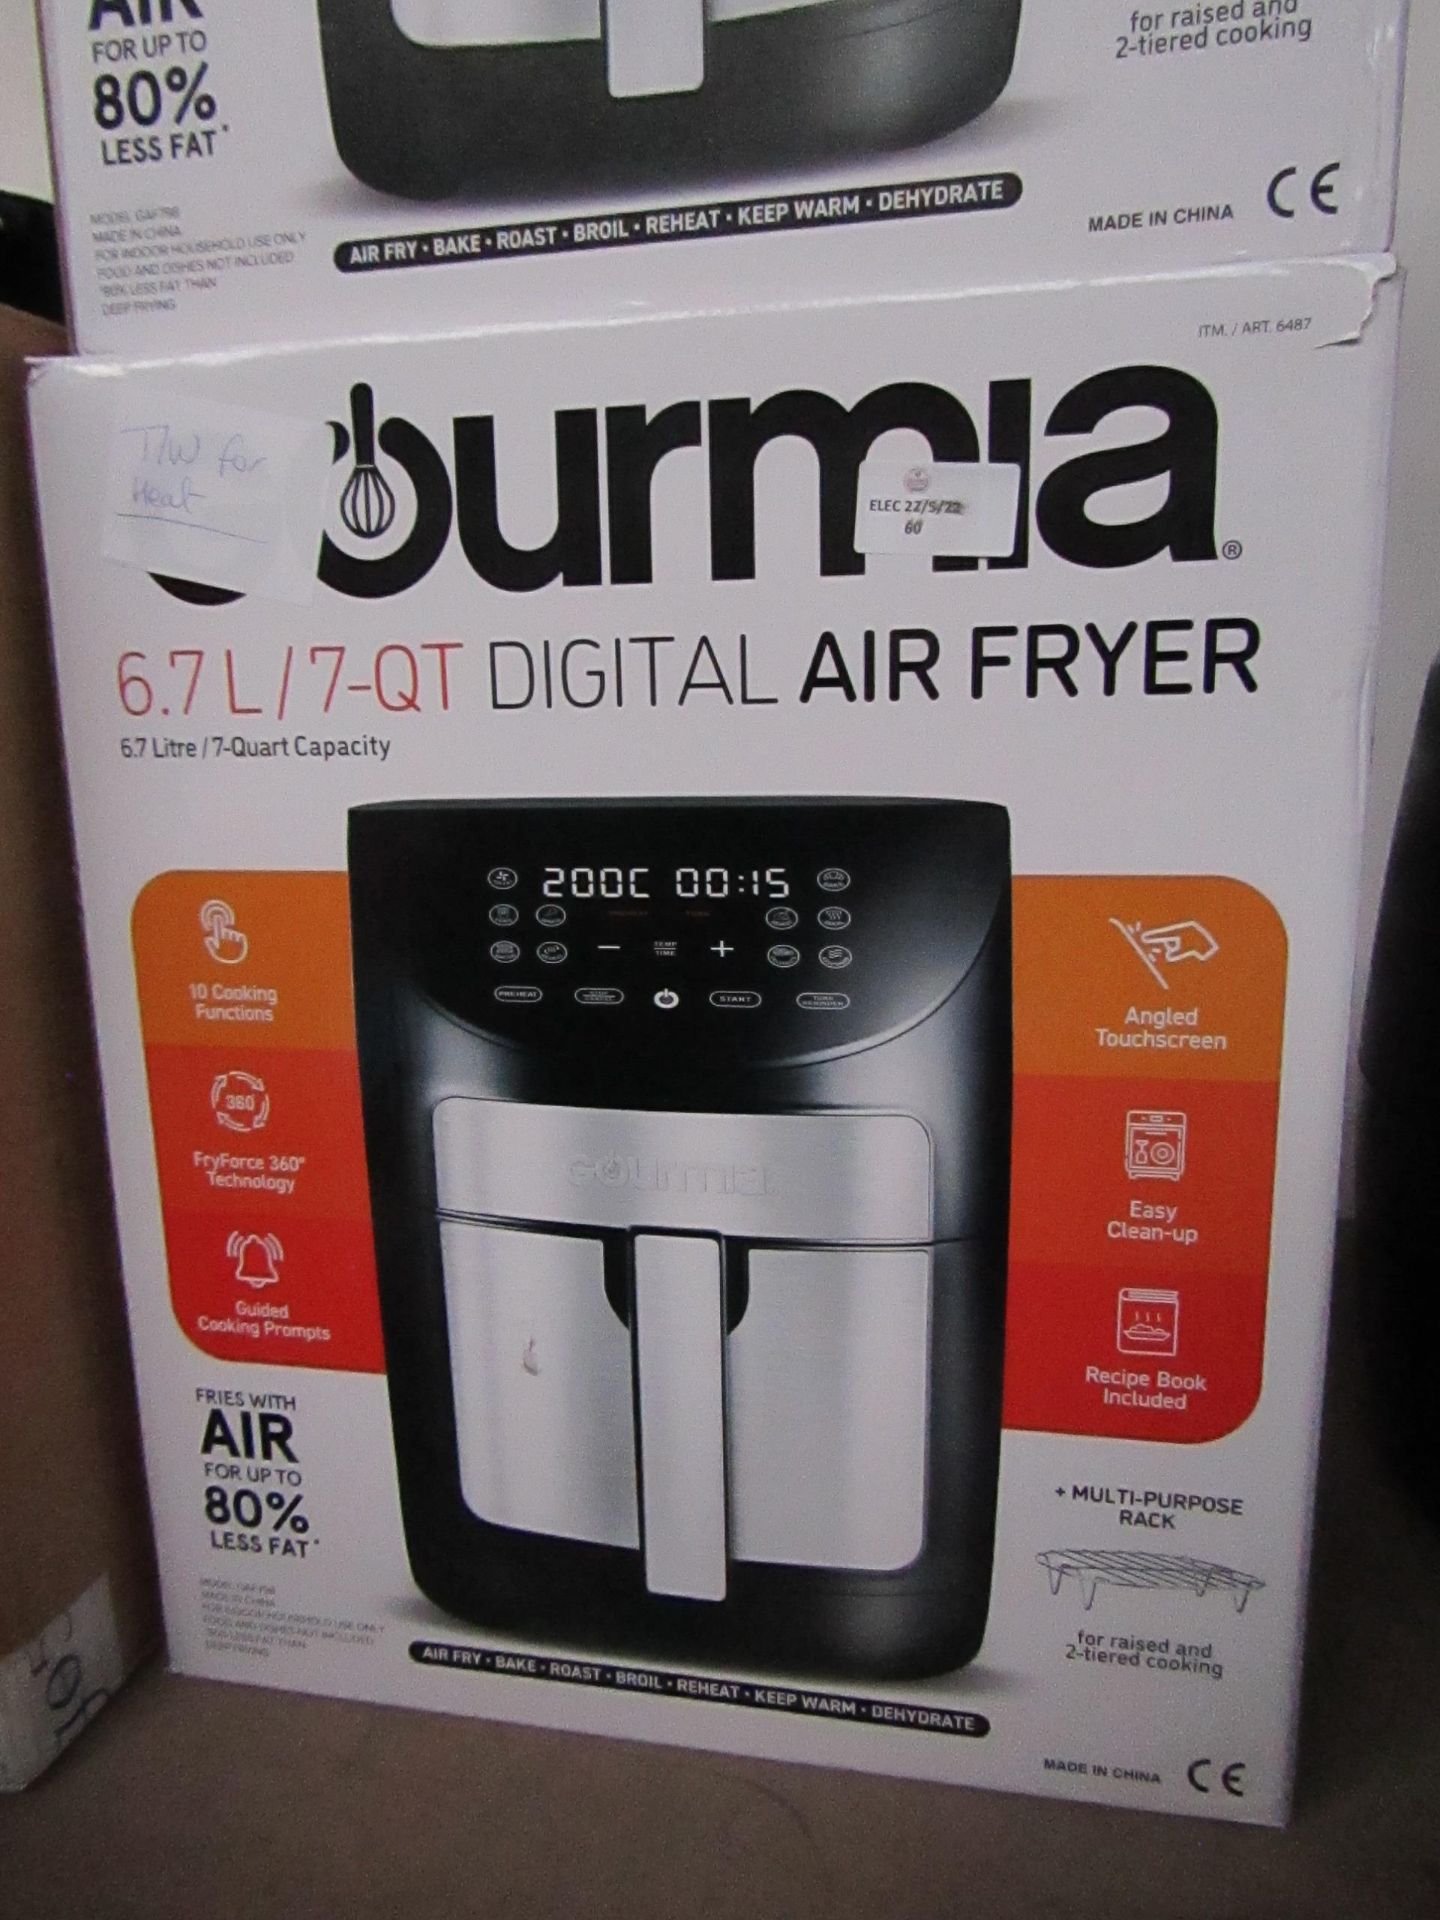 Gourmia 6.7l Digital Air fryer, tested working for heat on the fries setting, comes with original